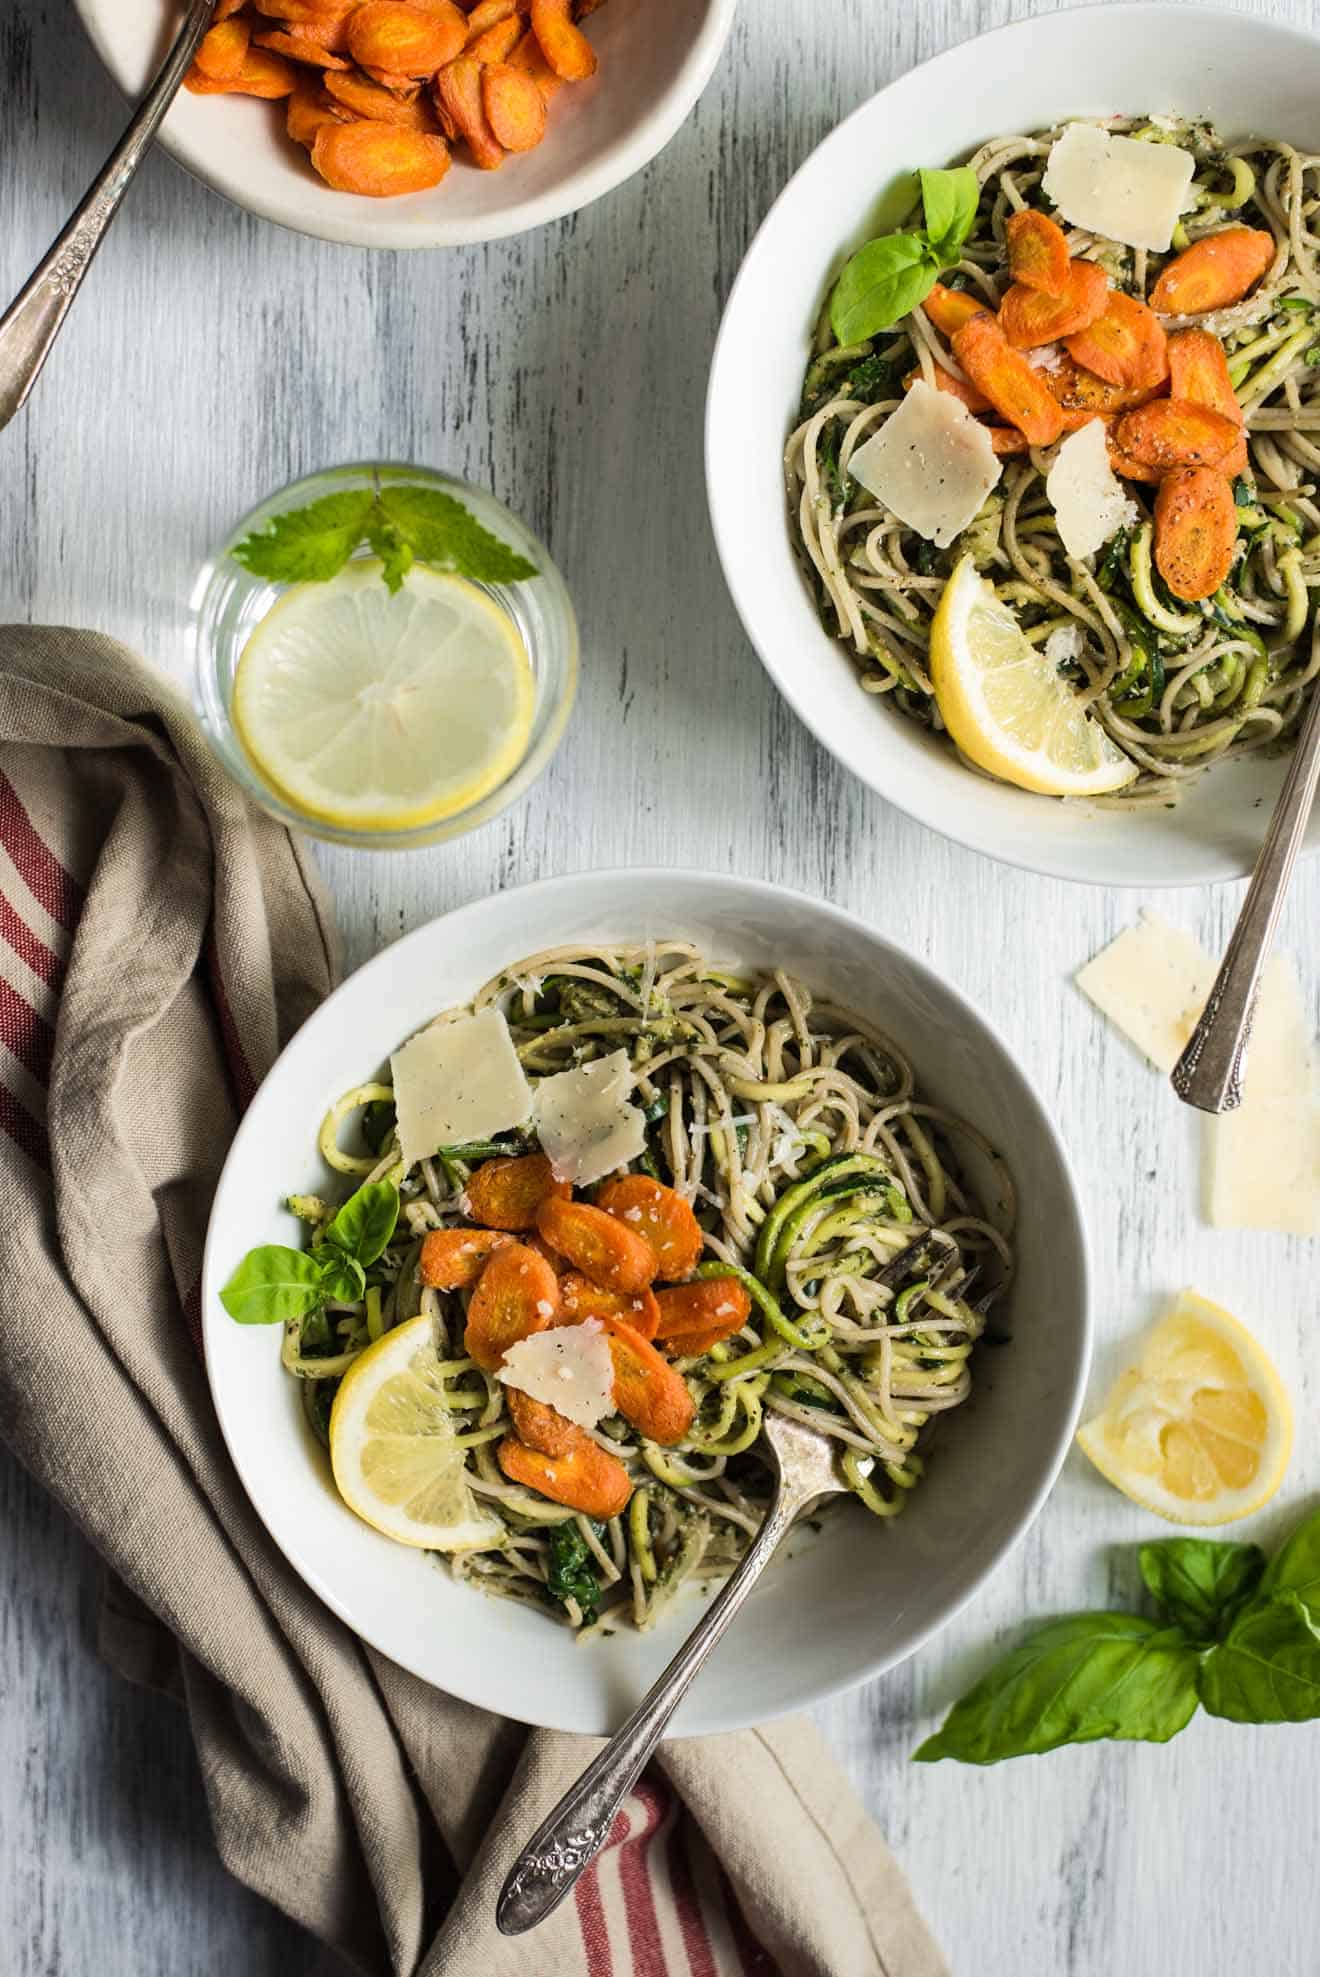 Spring Pasta with Carrot Top Pesto - easy gluten-free, vegetarian dinner in 30 minutes! by @healthynibs